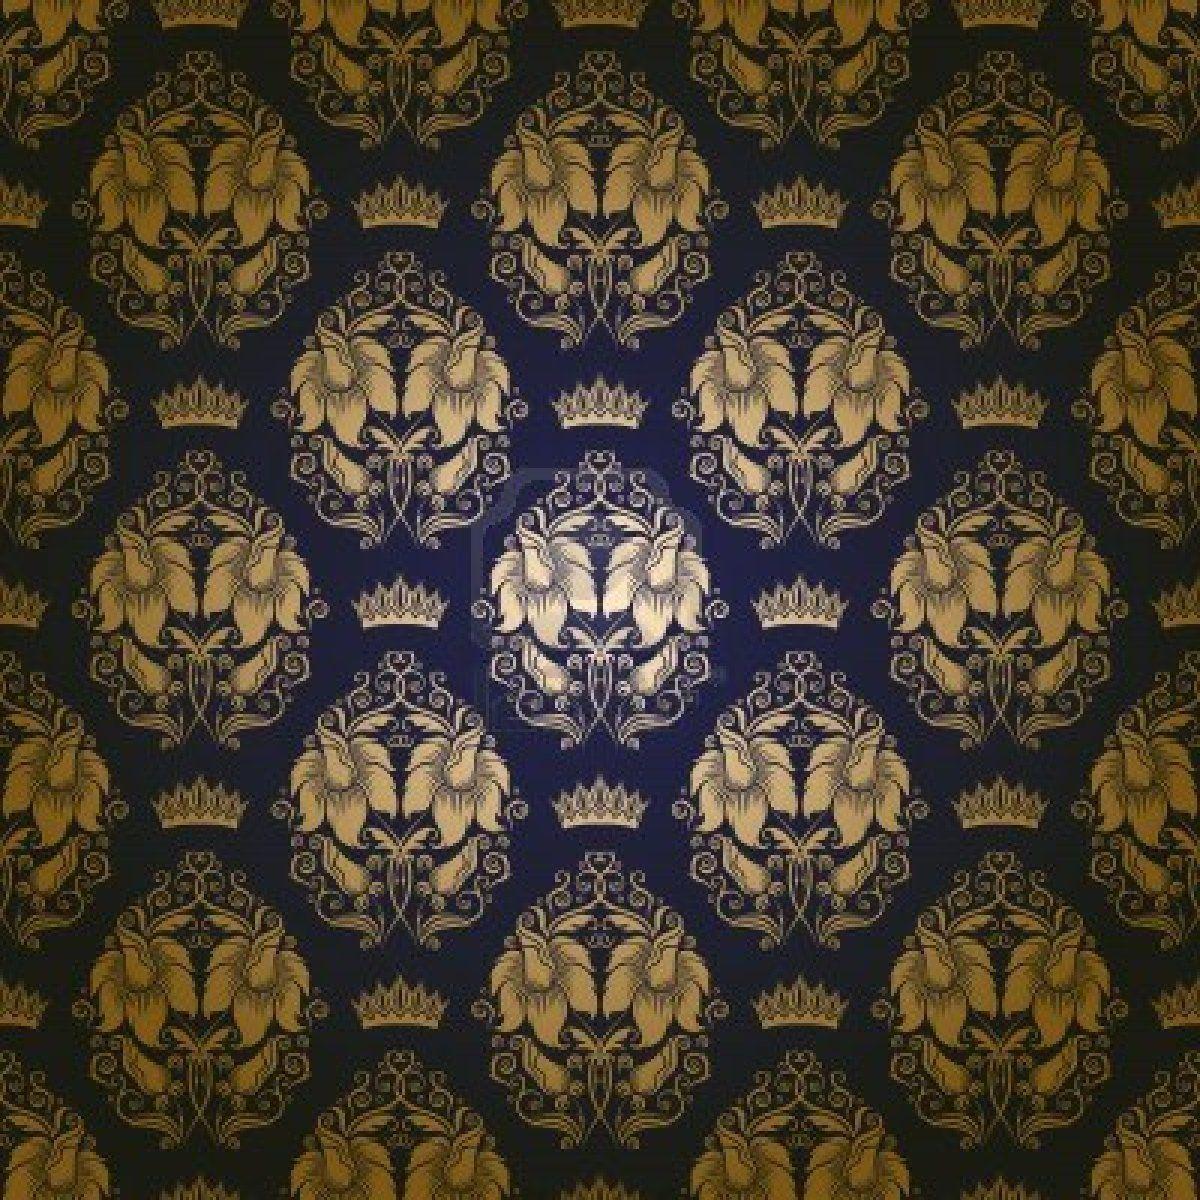 royalty wallpapers